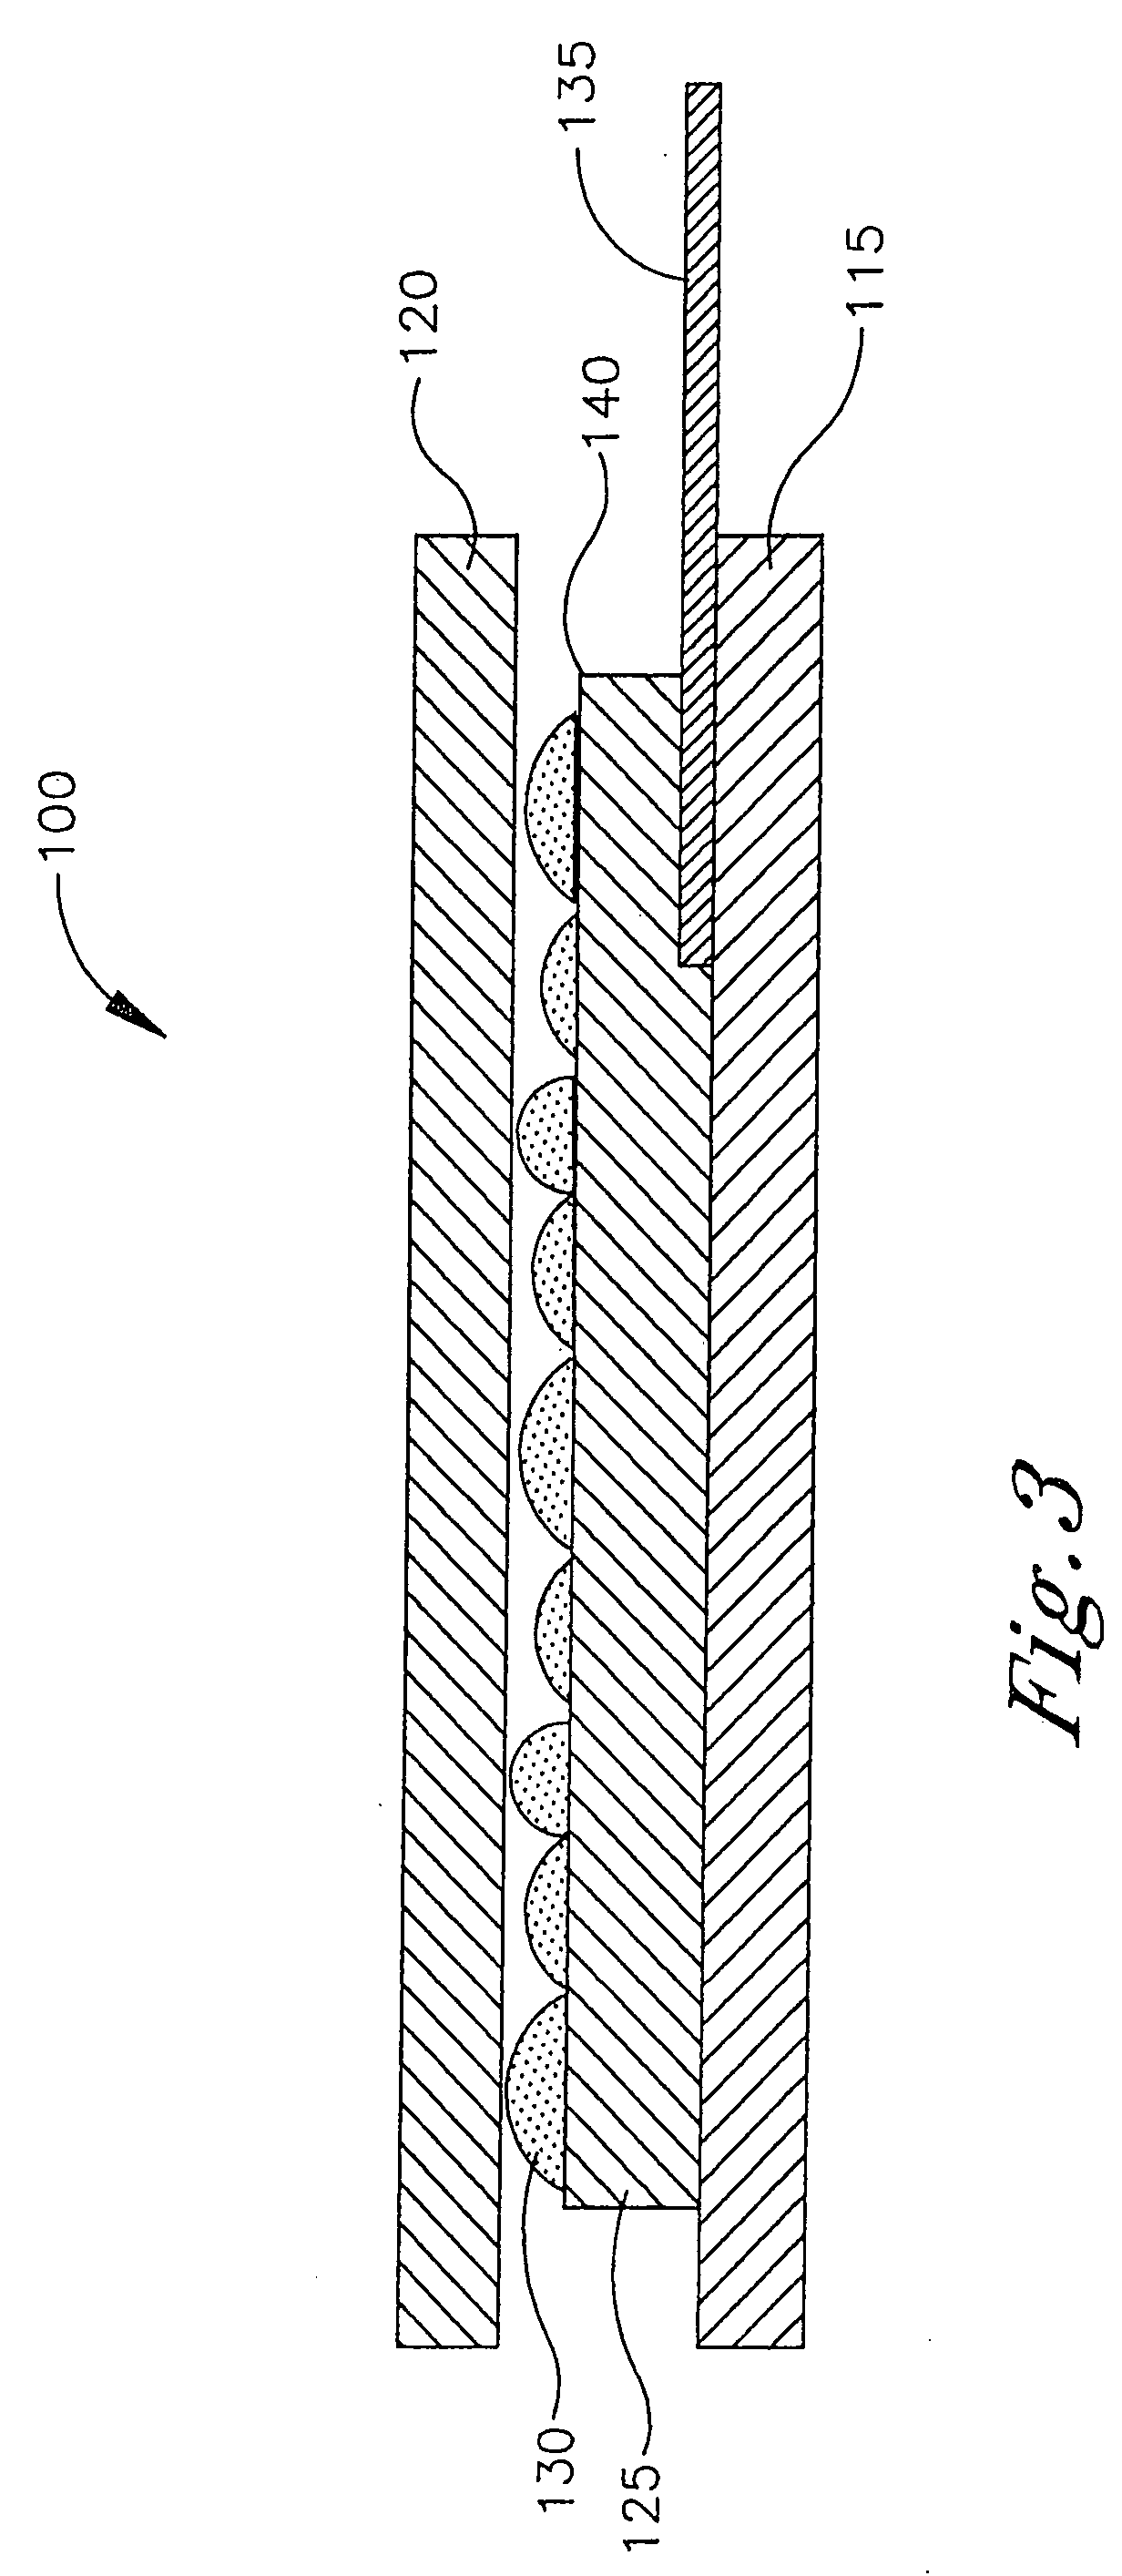 Water-dispersible patch containing an active agent for dermal delivery